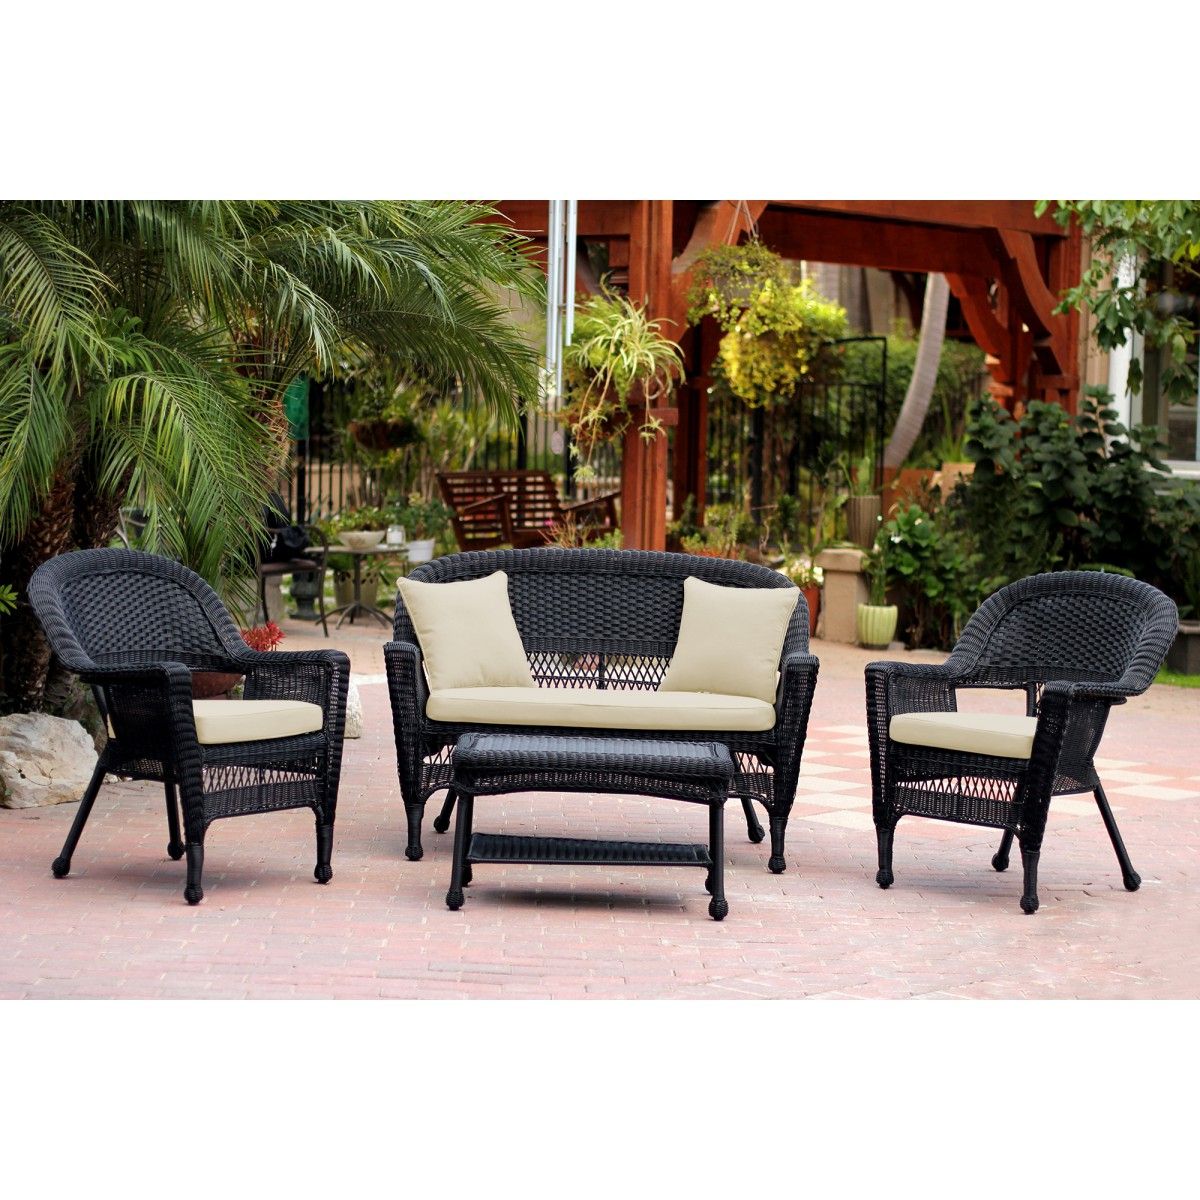 Black Cushion Patio Conversation Sets Intended For 2020 4pc Black Wicker Conversation Set – Ivory Cushion (View 8 of 15)